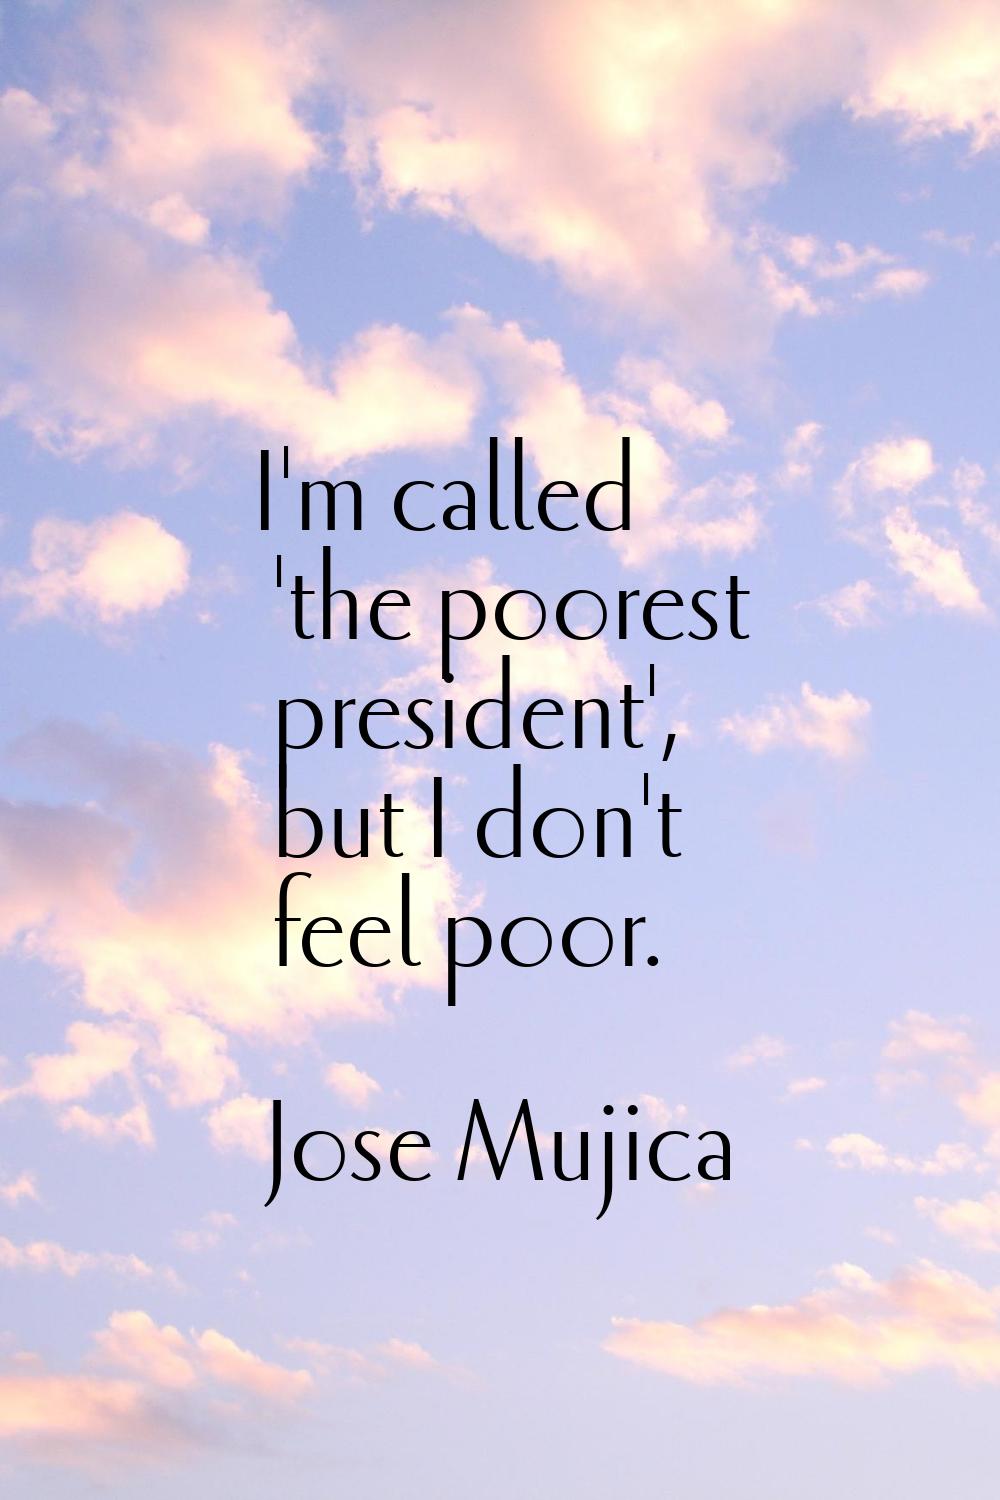 I'm called 'the poorest president', but I don't feel poor.